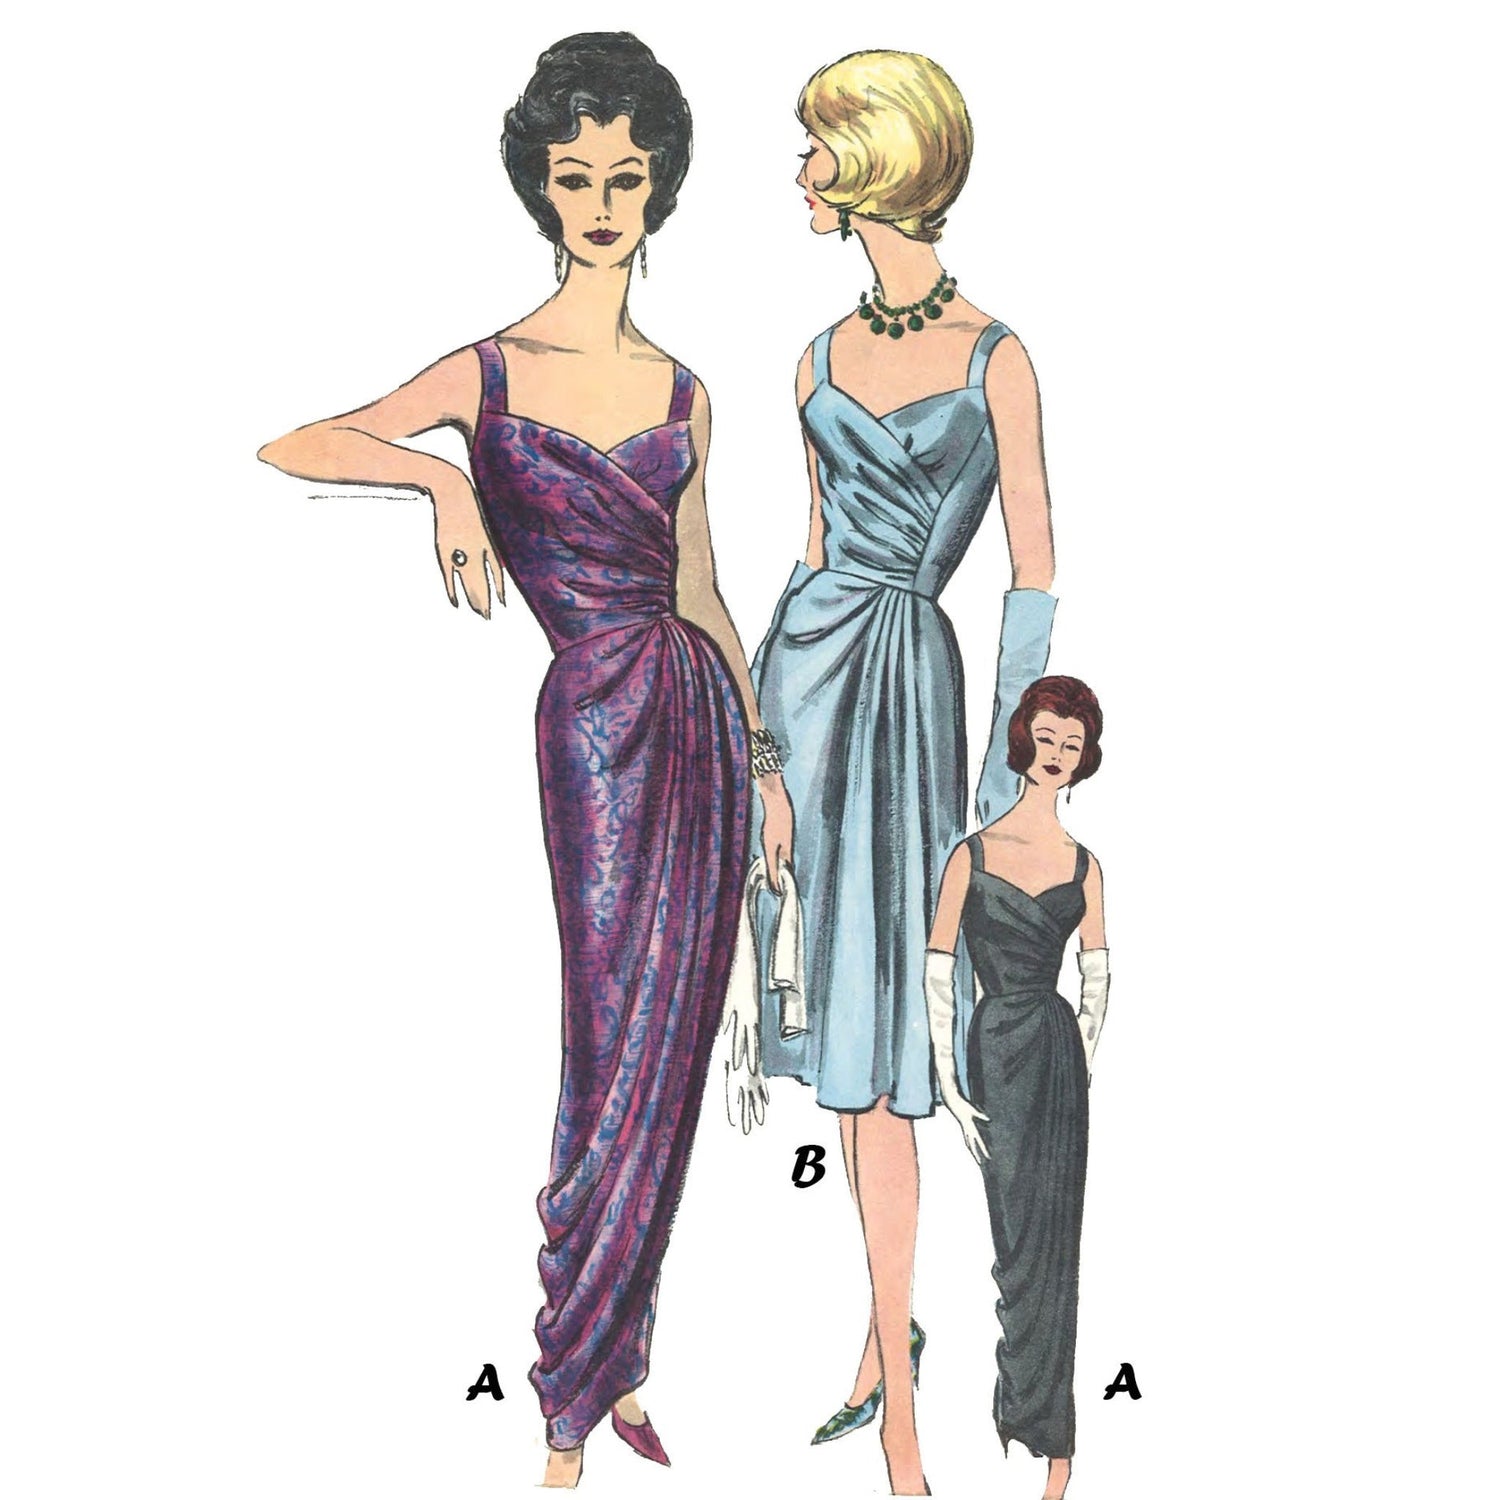 1920s flapper wrap dress vintage sewing pattern reproduction